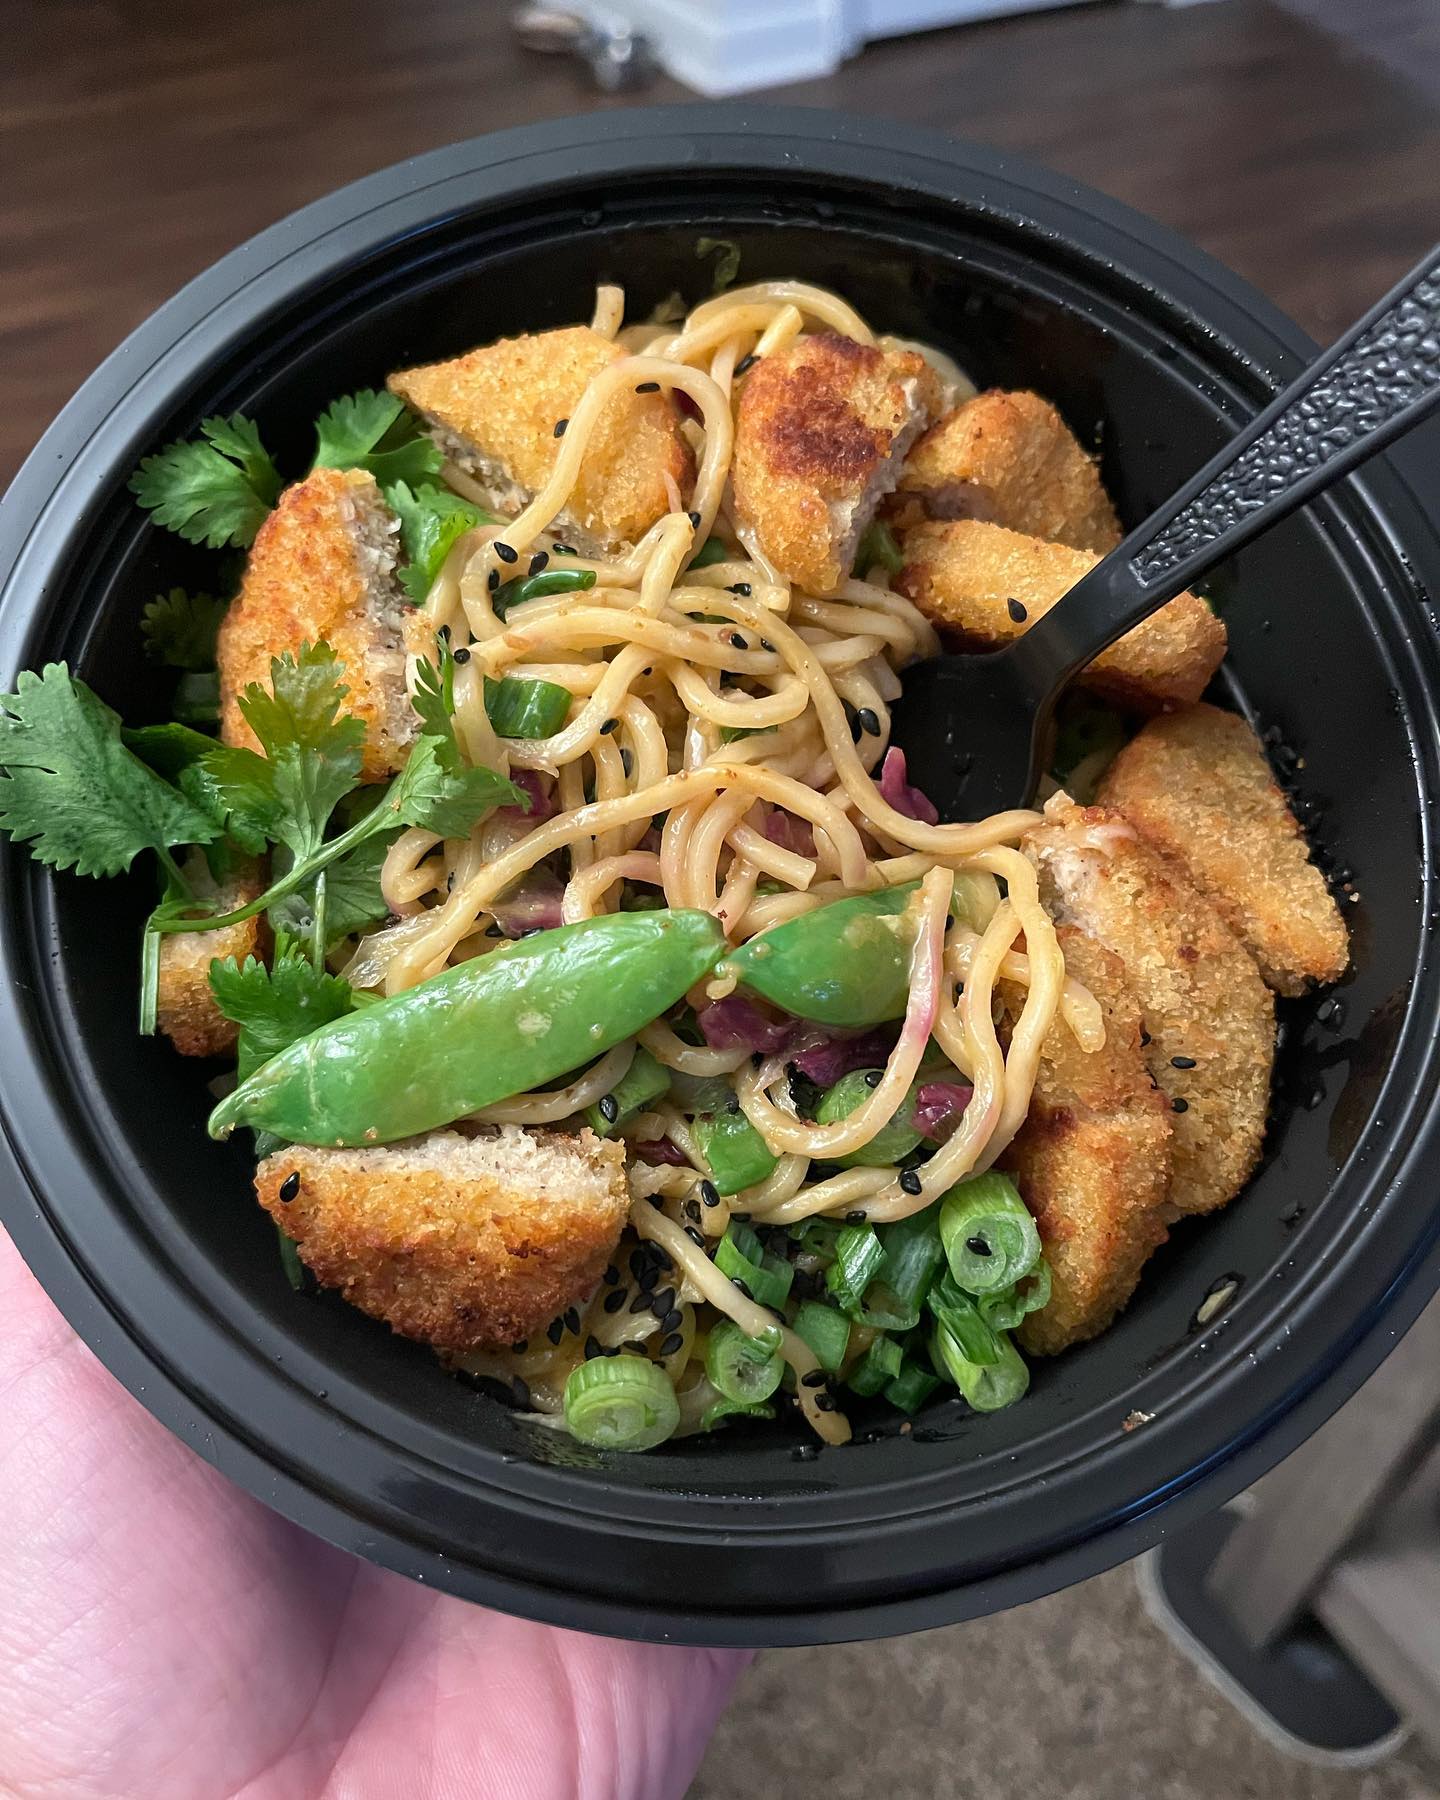 Bowl of food from Noodles & Co.